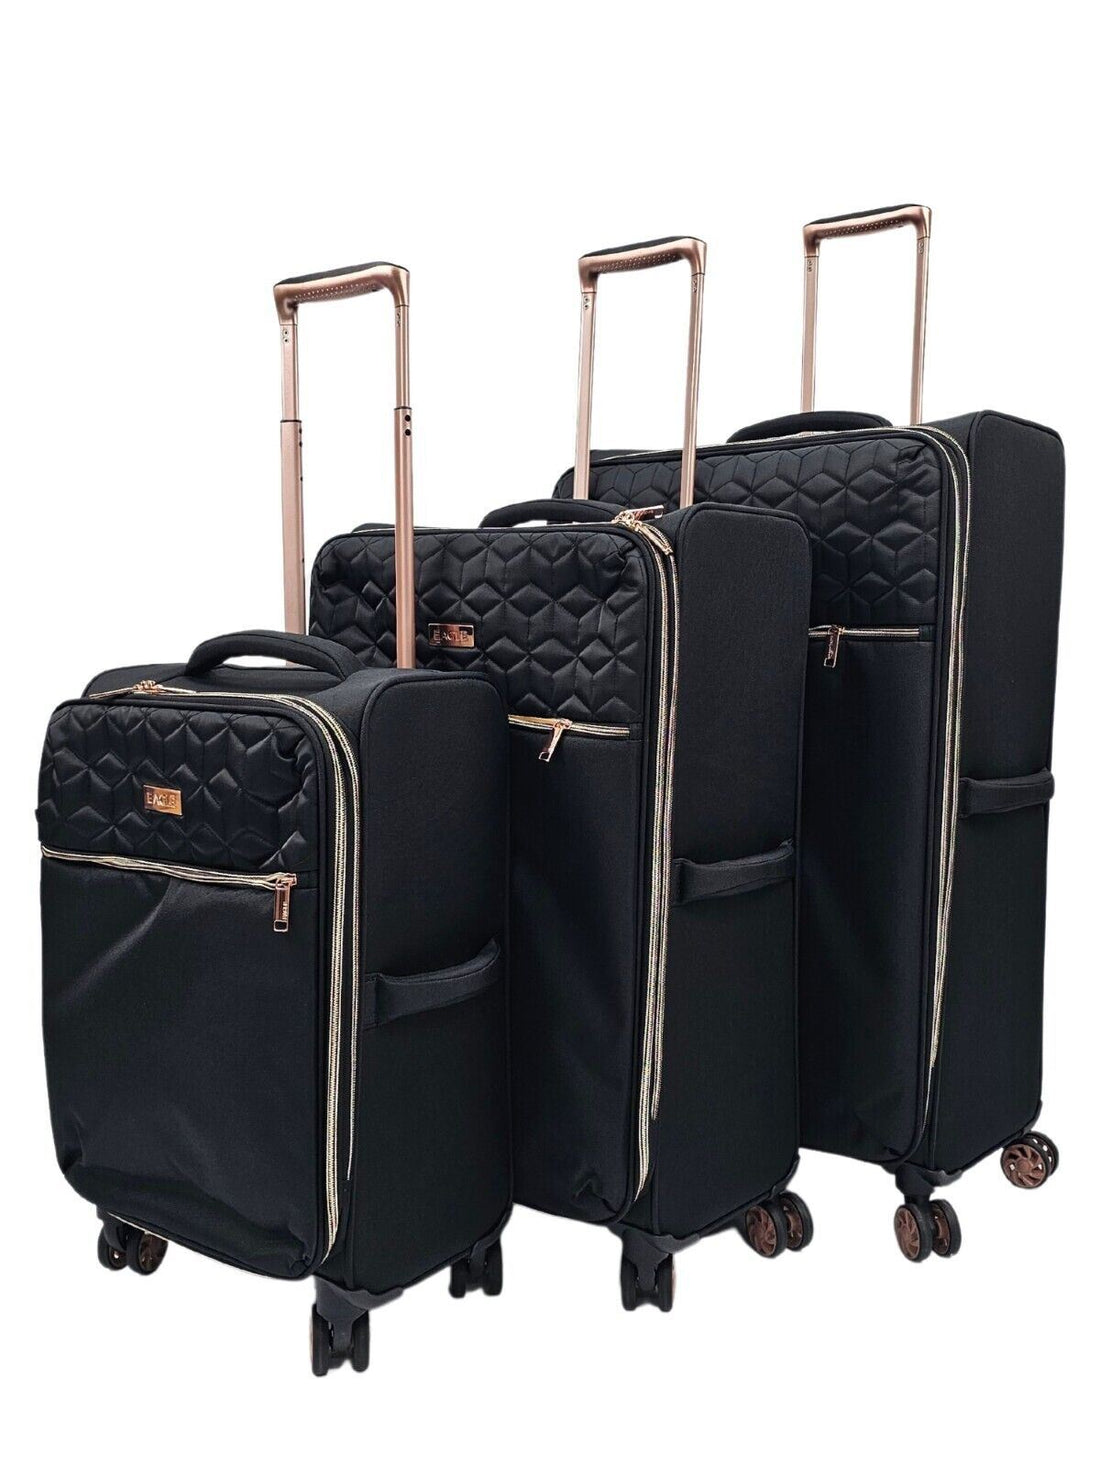 Birmingham Set of 3 Soft Shell Suitcase in Black